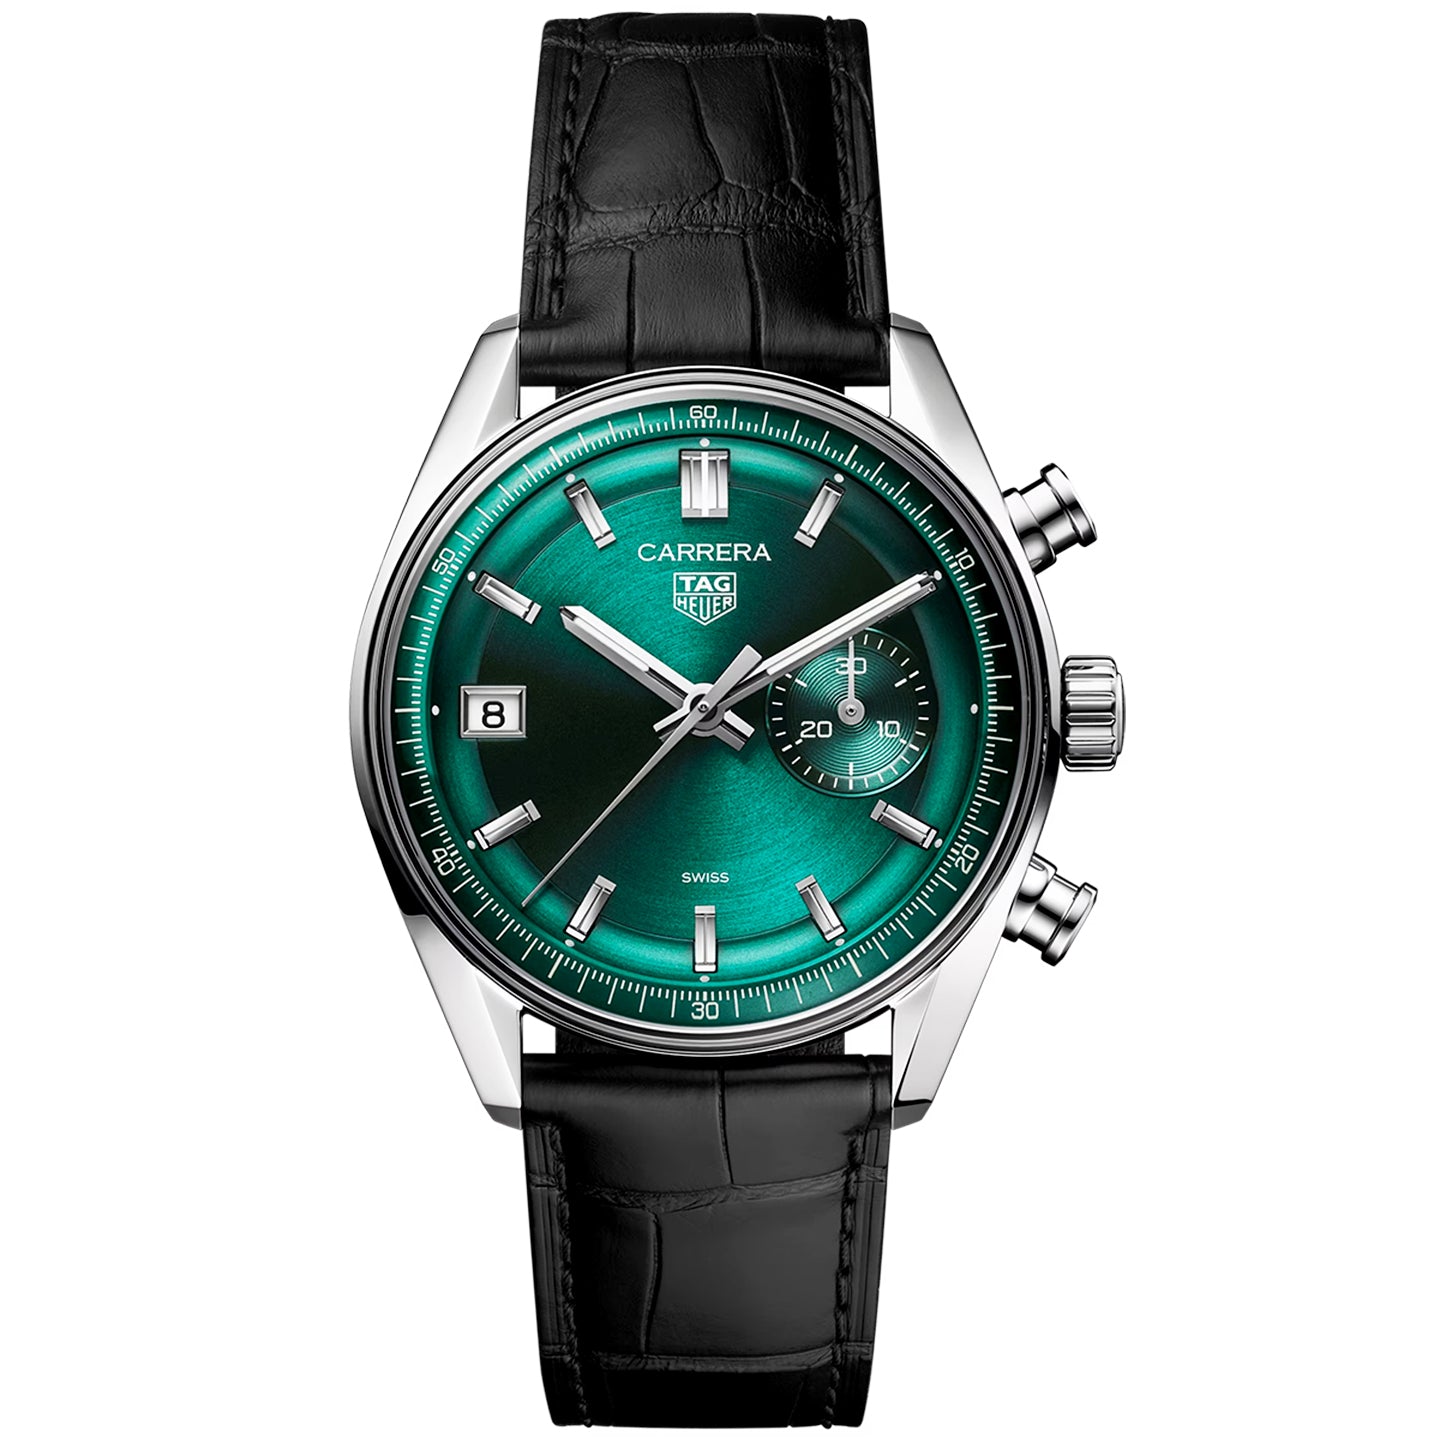 Carrera Dato 39mm Teal Green Dial Automatic Chronograph Watch